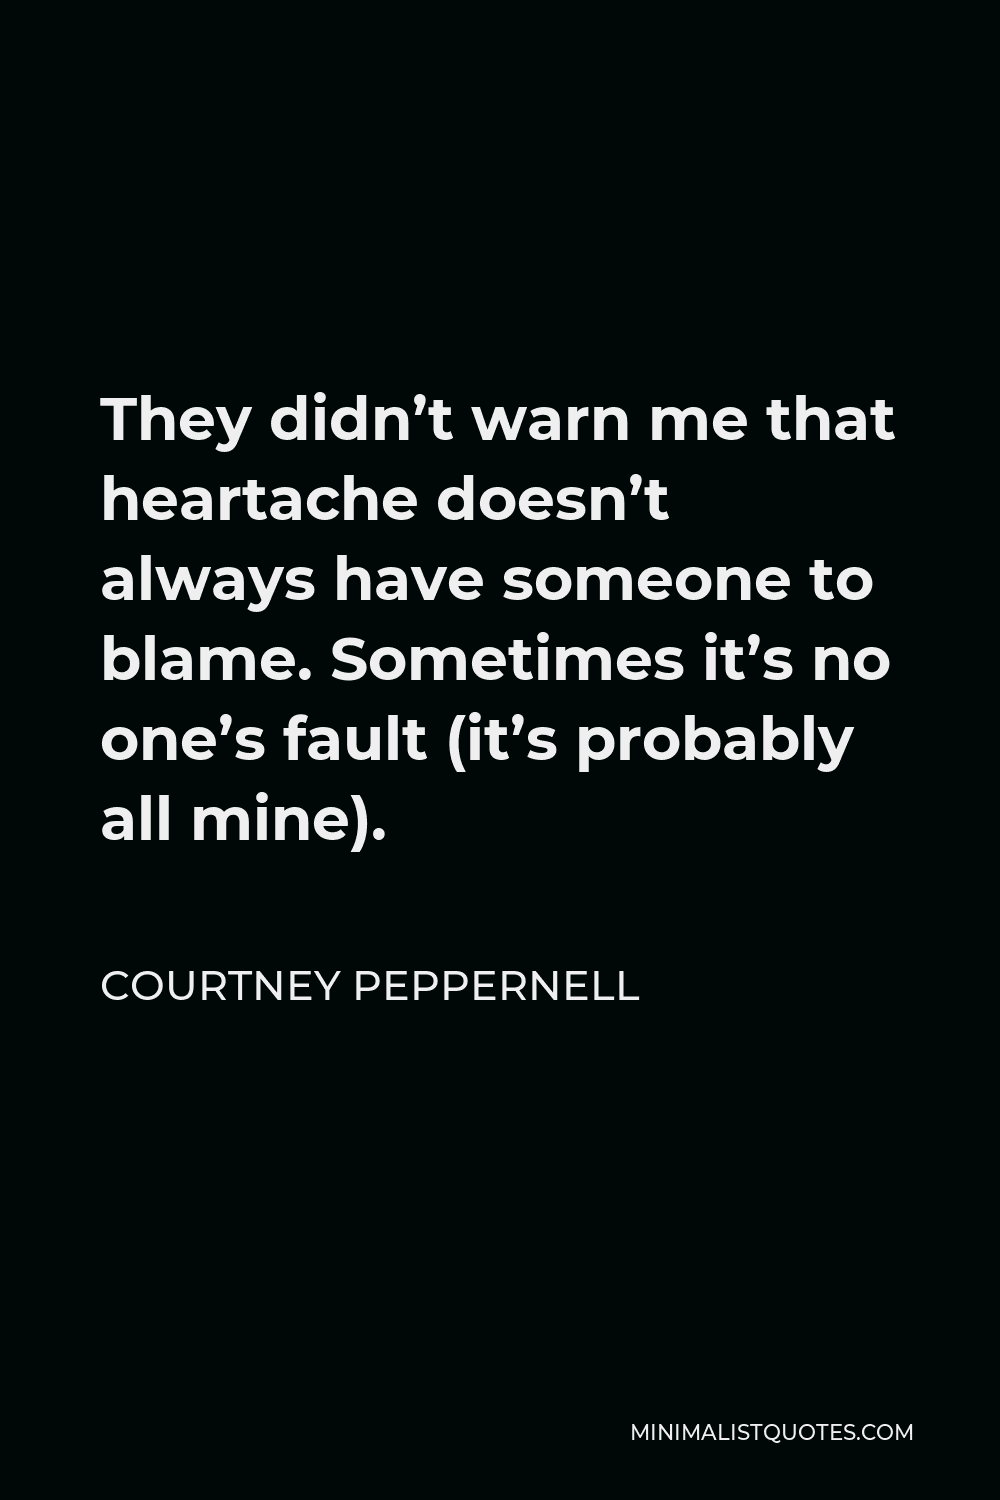 Courtney Peppernell Quote - They didn’t warn me that heartache doesn’t always have someone to blame. Sometimes it’s no one’s fault (it’s probably all mine).